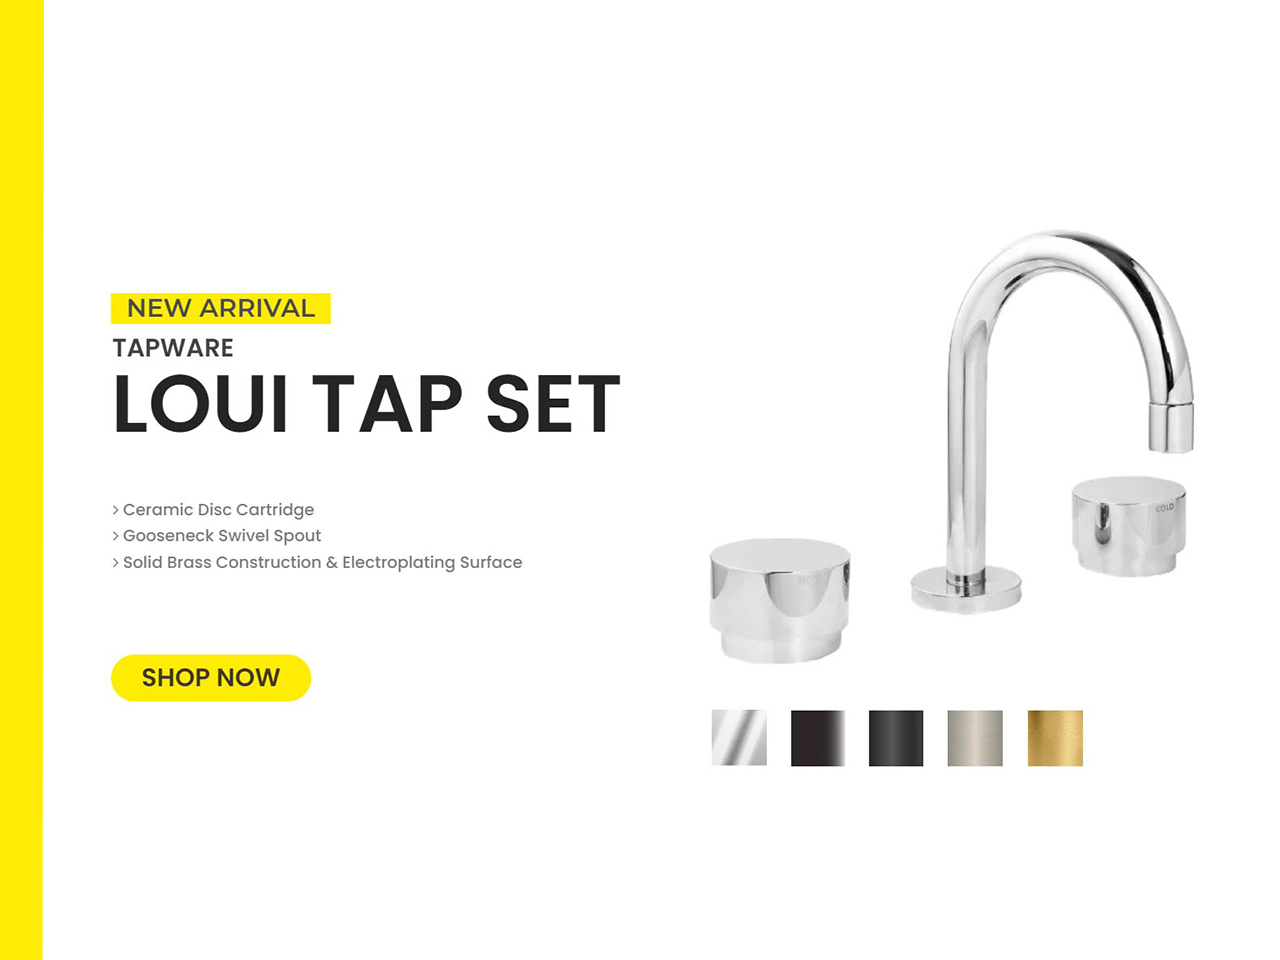 3 Reasons to Choose Three-piece Tapware for Your Bathroom